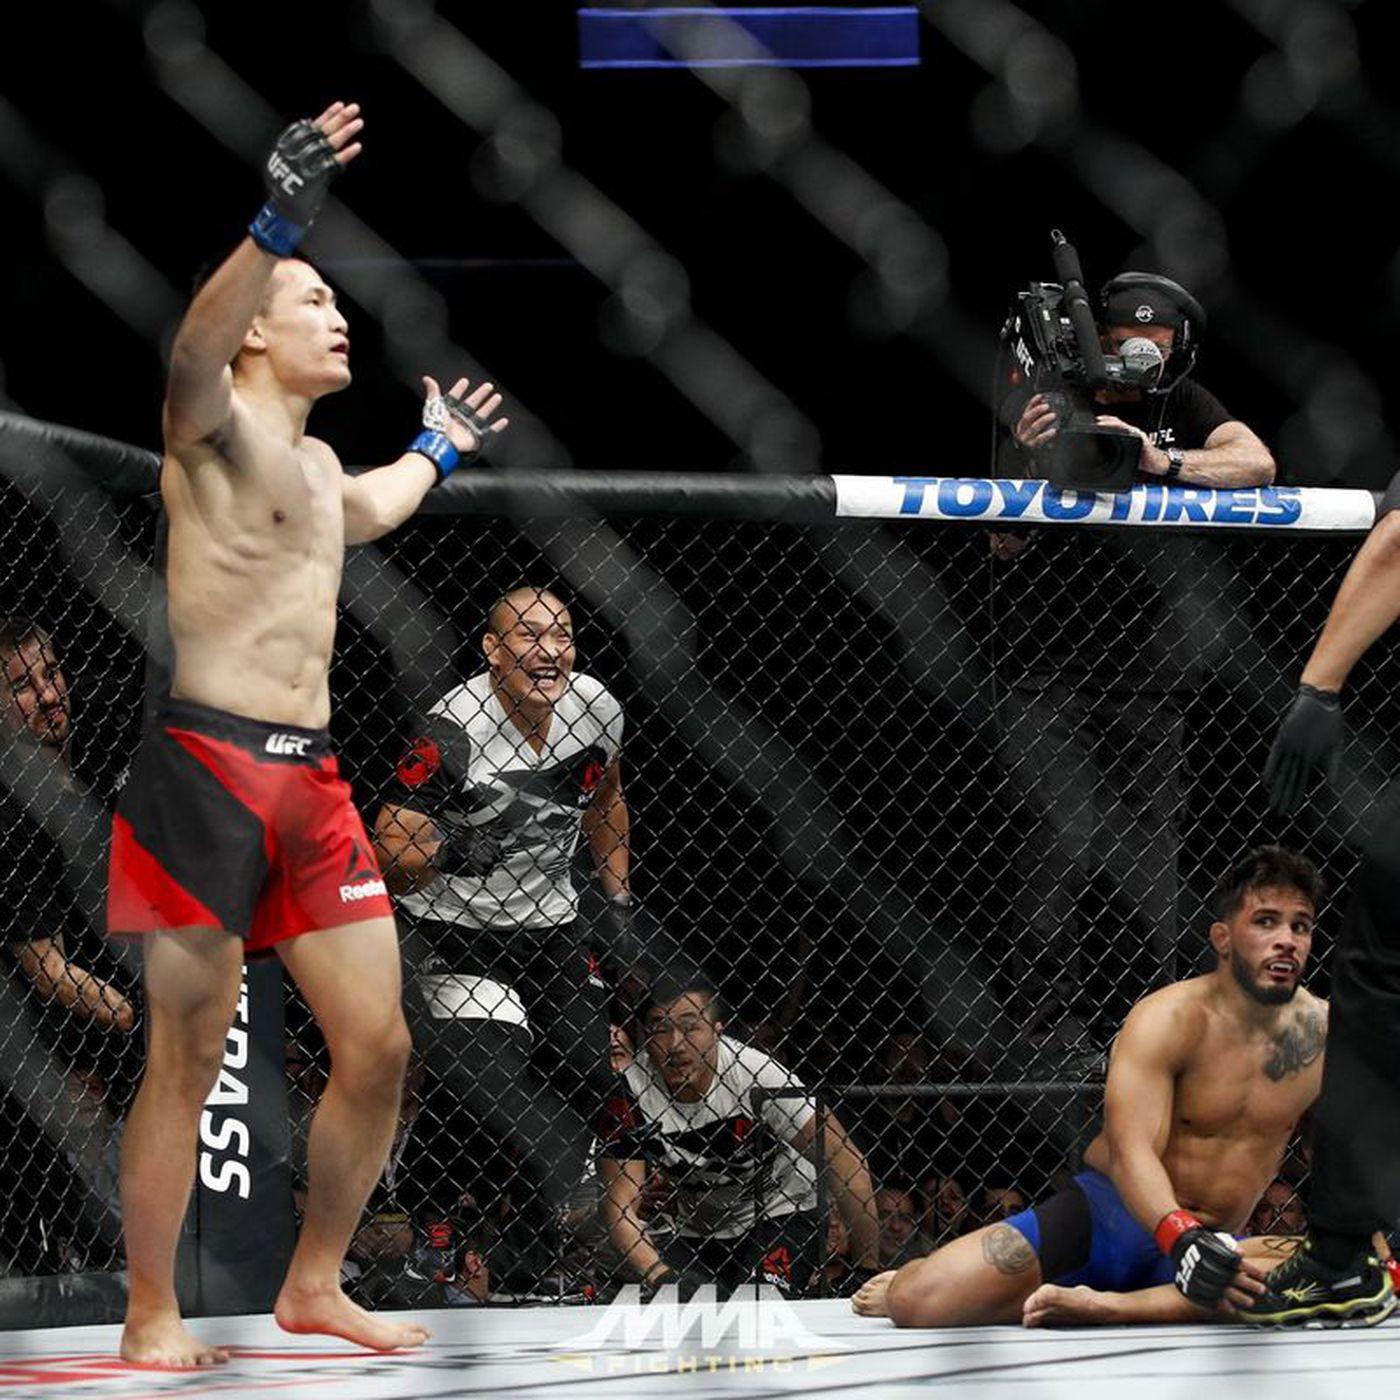 Chan Sung Jung won the main event against Dennis Bermudez in this Fight NIght. Photo by Bloody Elbow.